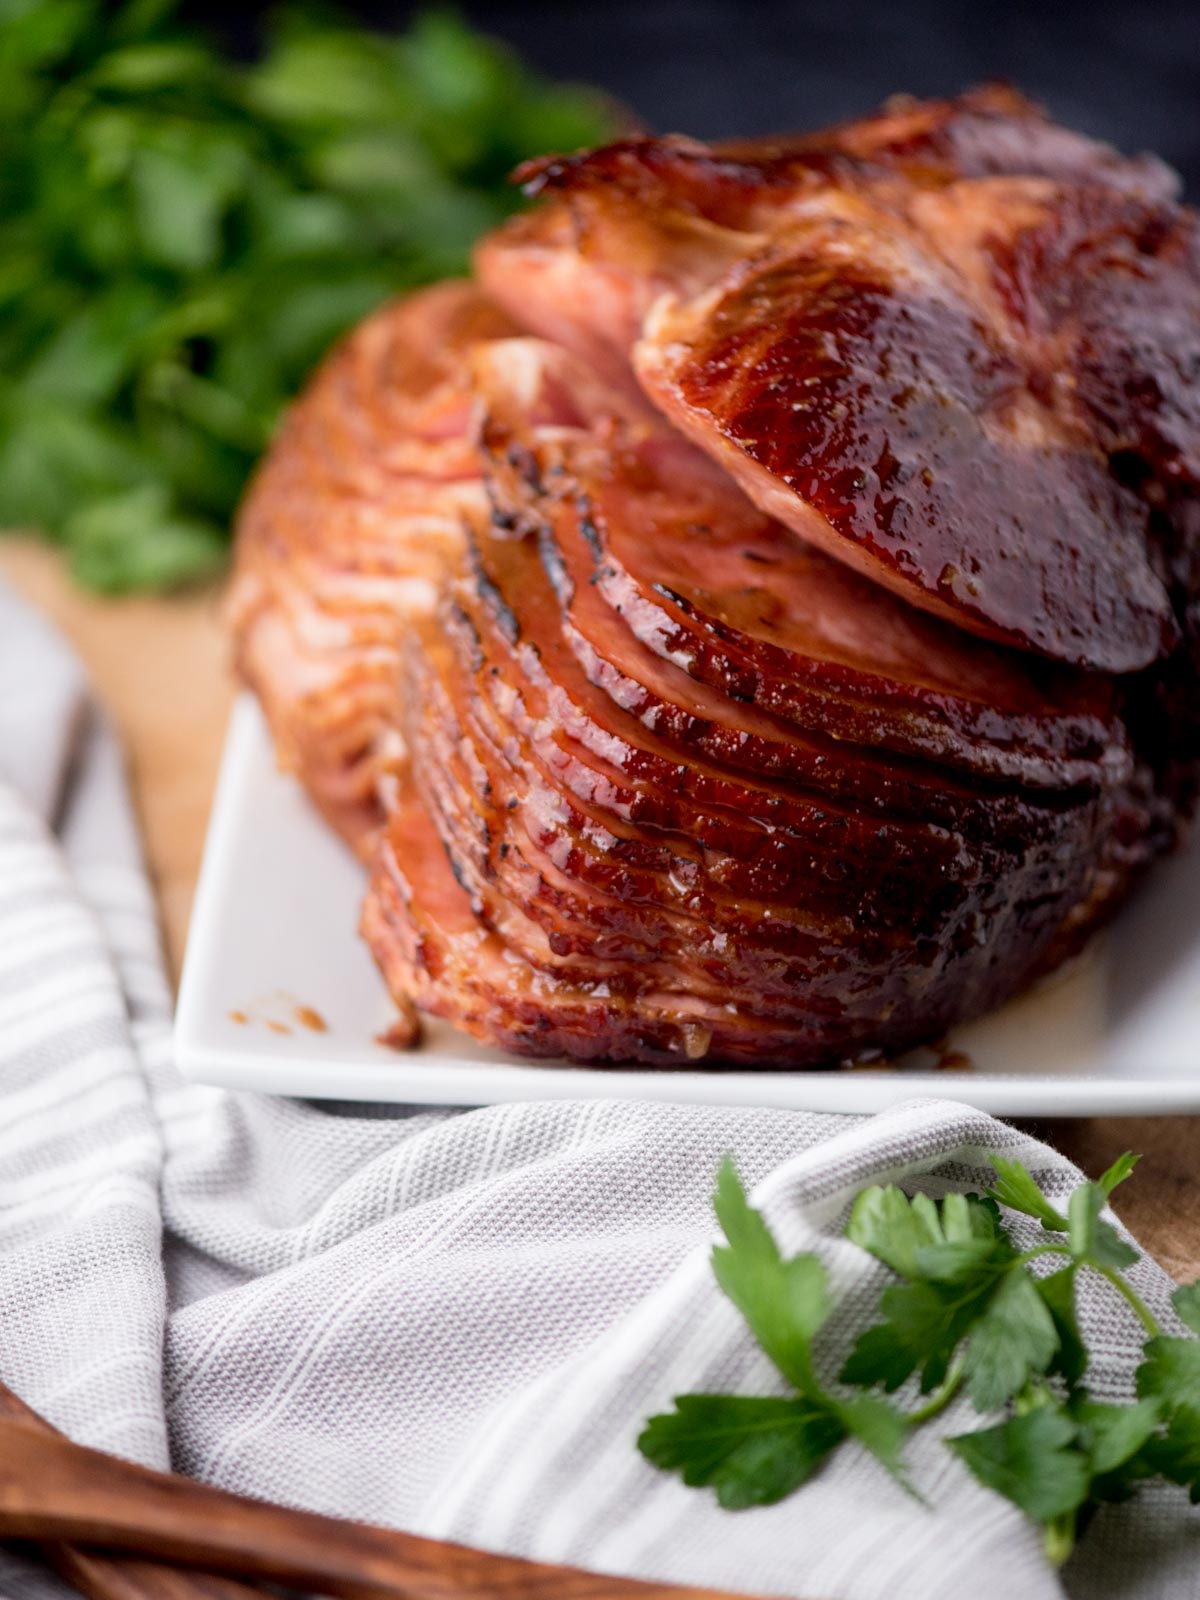 brown sugar glazed ham on a plate surrounded by a kitchen towel and parsley